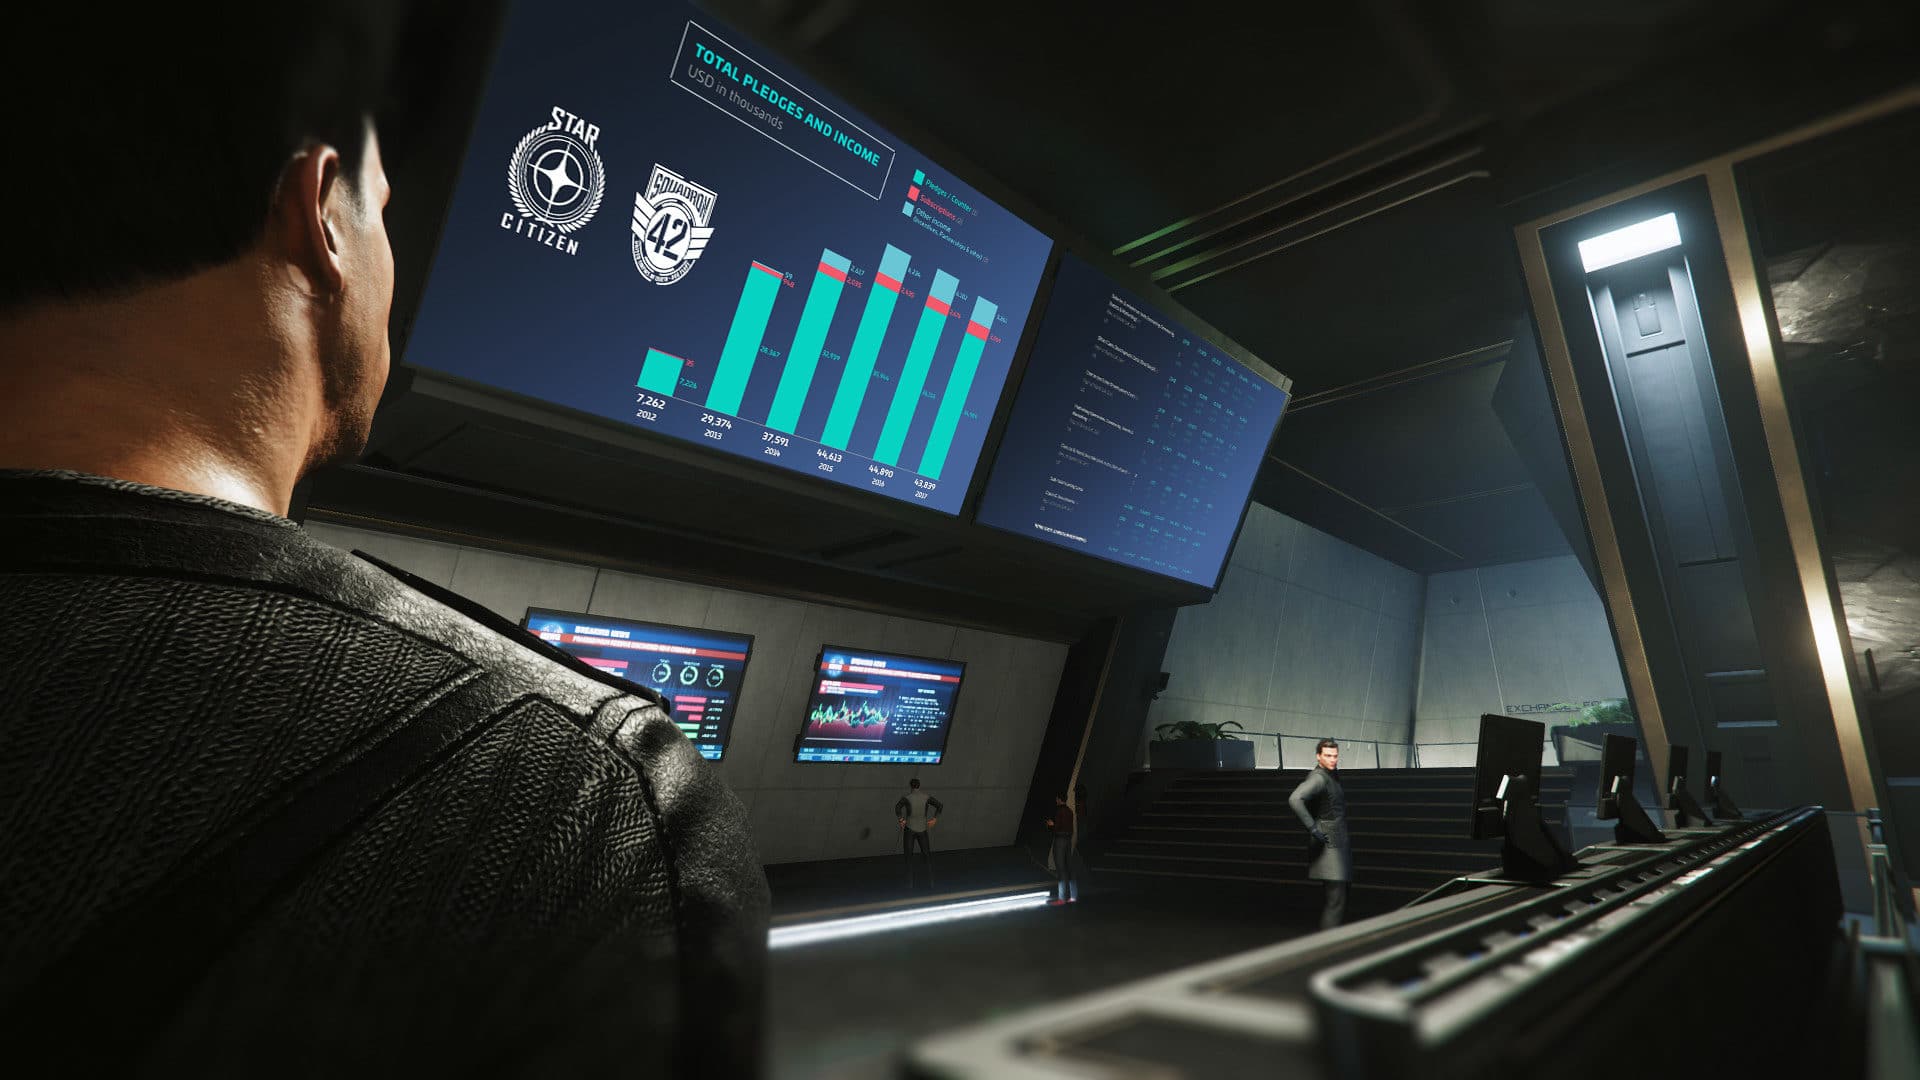 Star Citizen FREE 10,000 UEC in game credits CODE: STAR-D6GM-Z45R